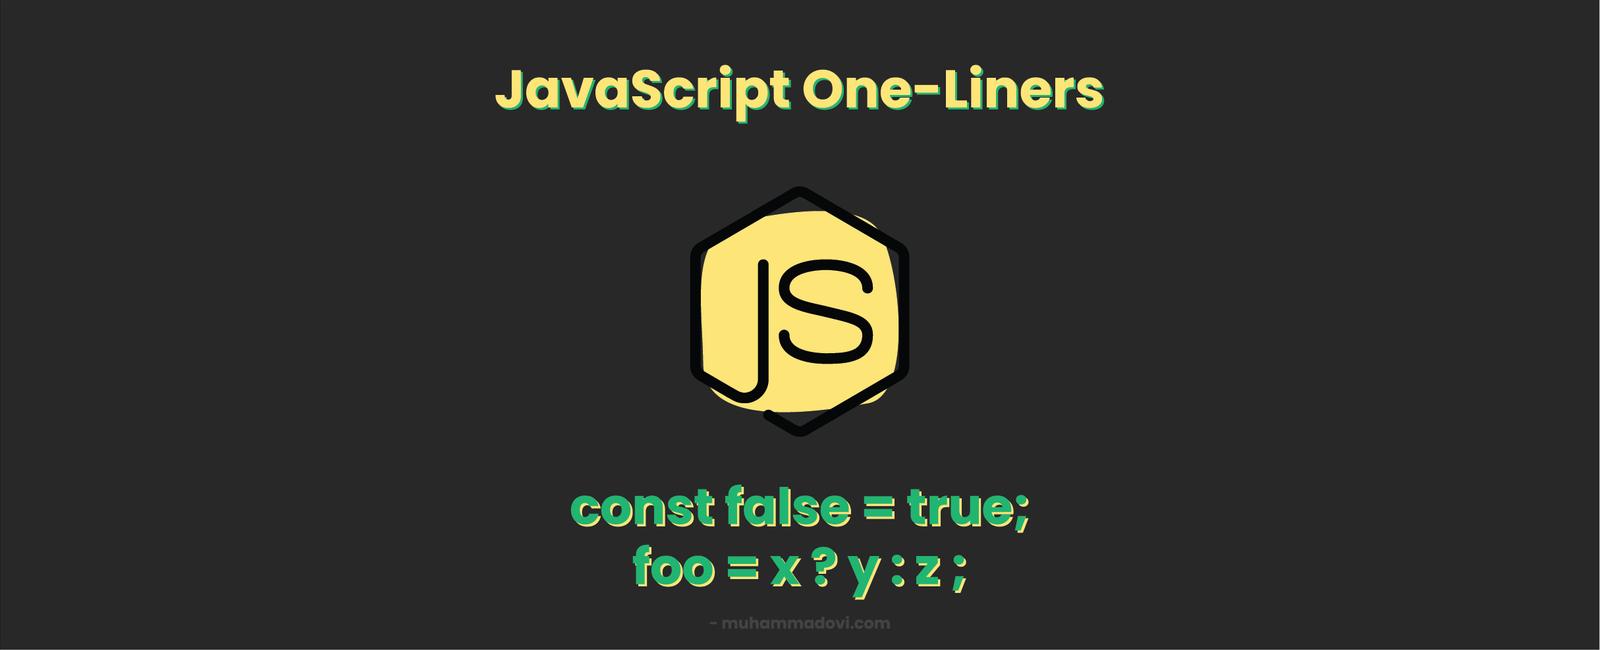 20 JavaScript One-Liners That Will Help You Code Like a Pro